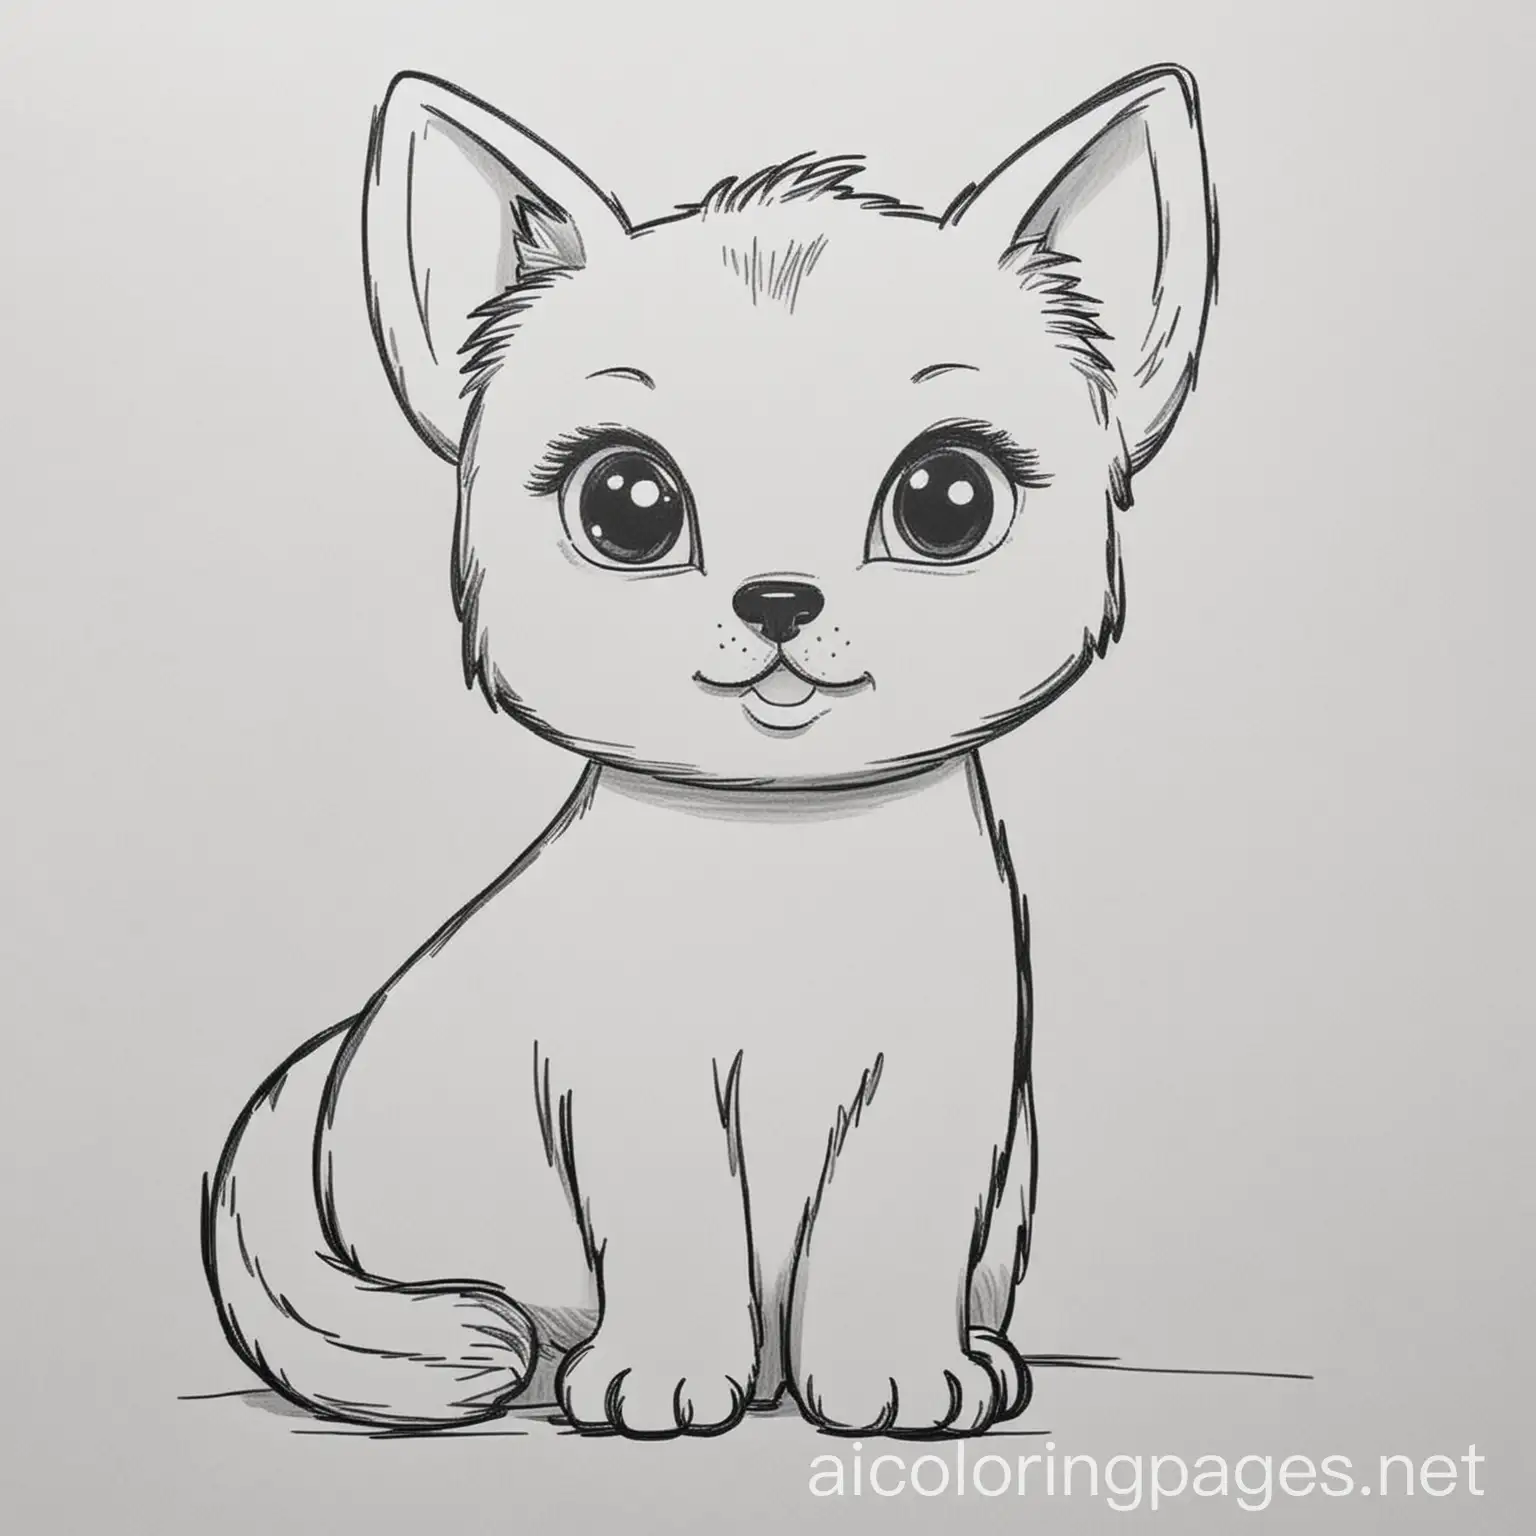 Simple-Pet-Animal-Coloring-Page-Black-and-White-Line-Art-on-White-Background